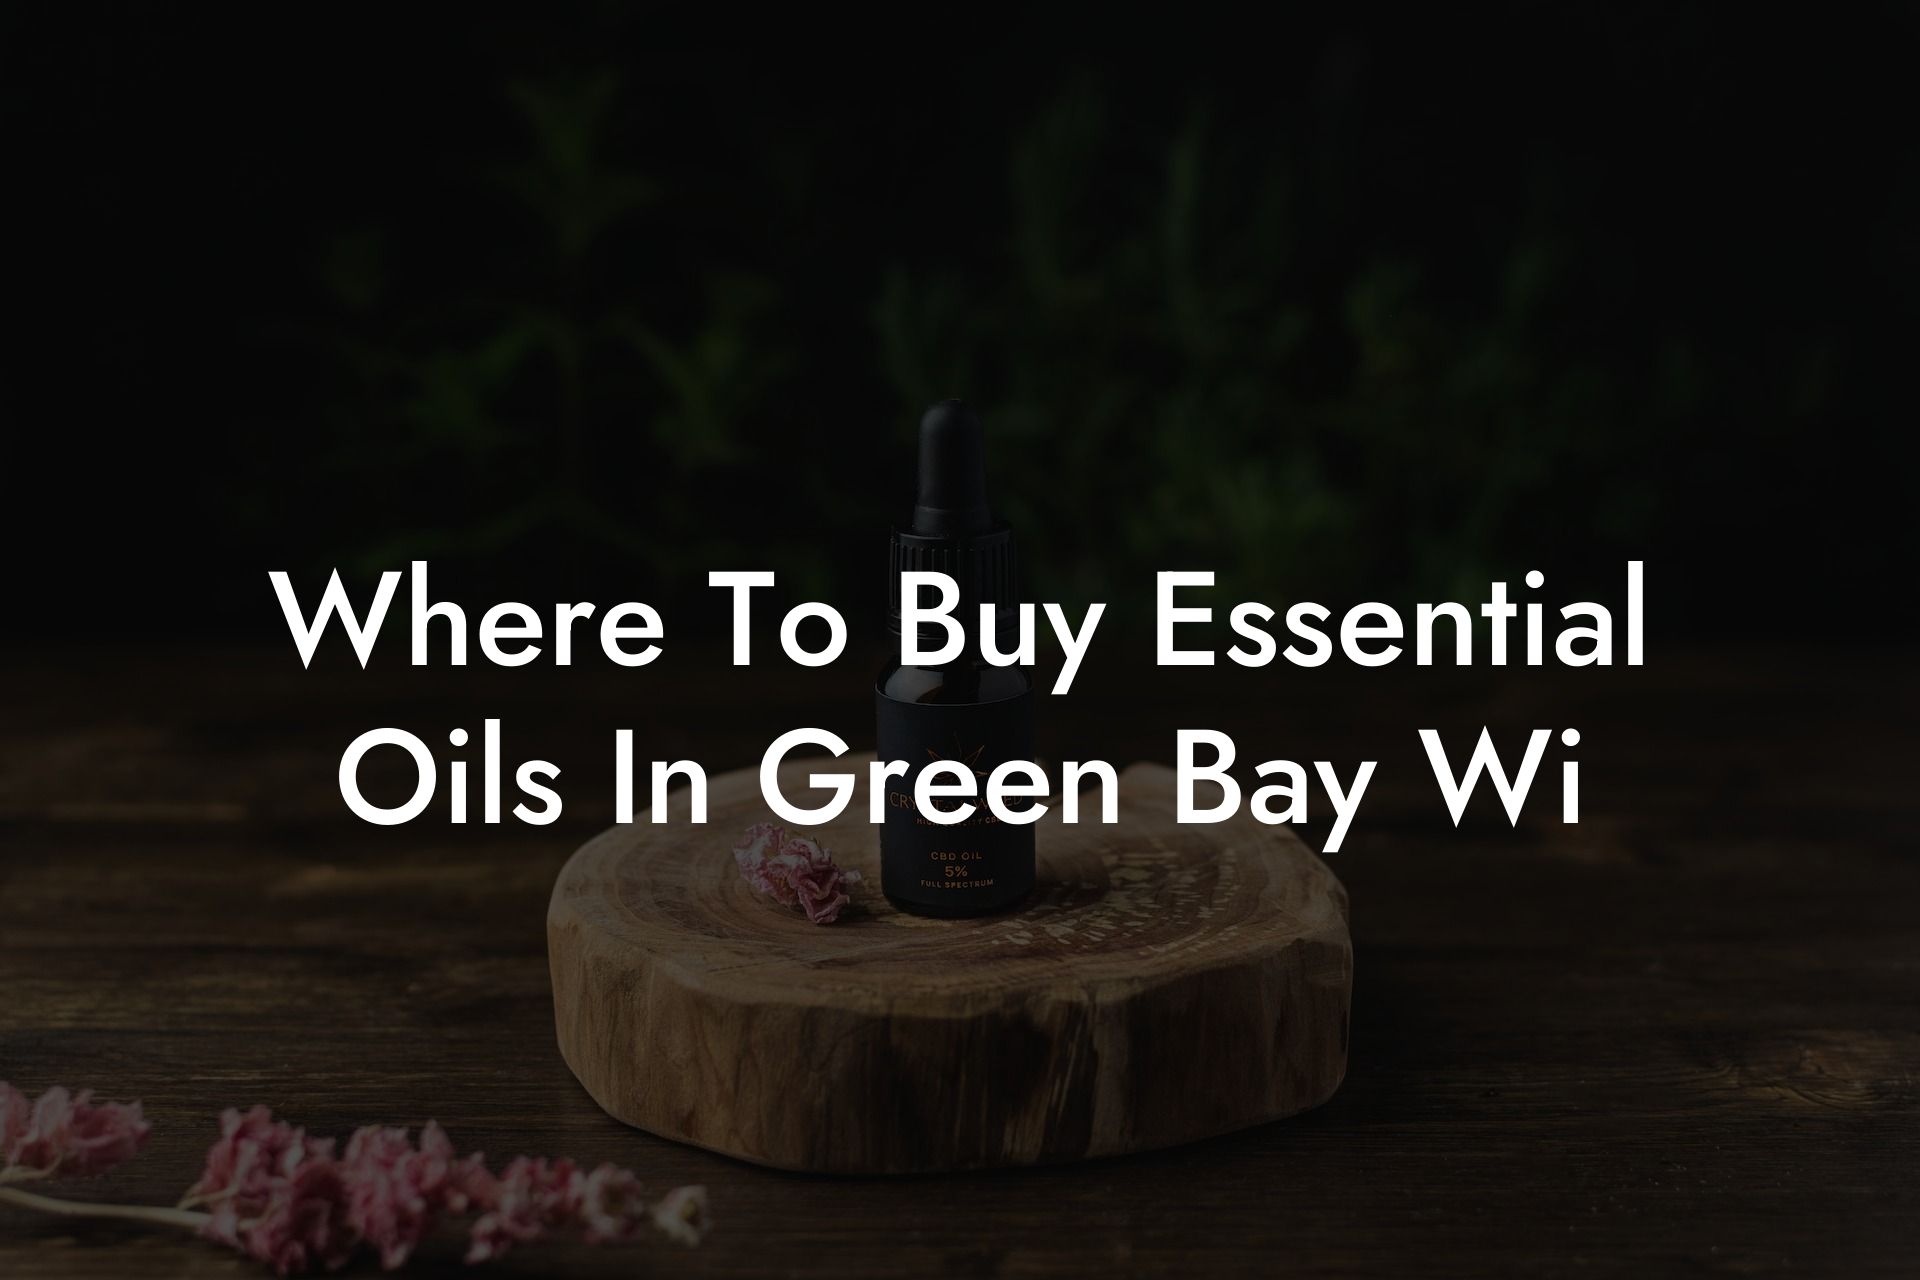 Where To Buy Essential Oils In Green Bay Wi